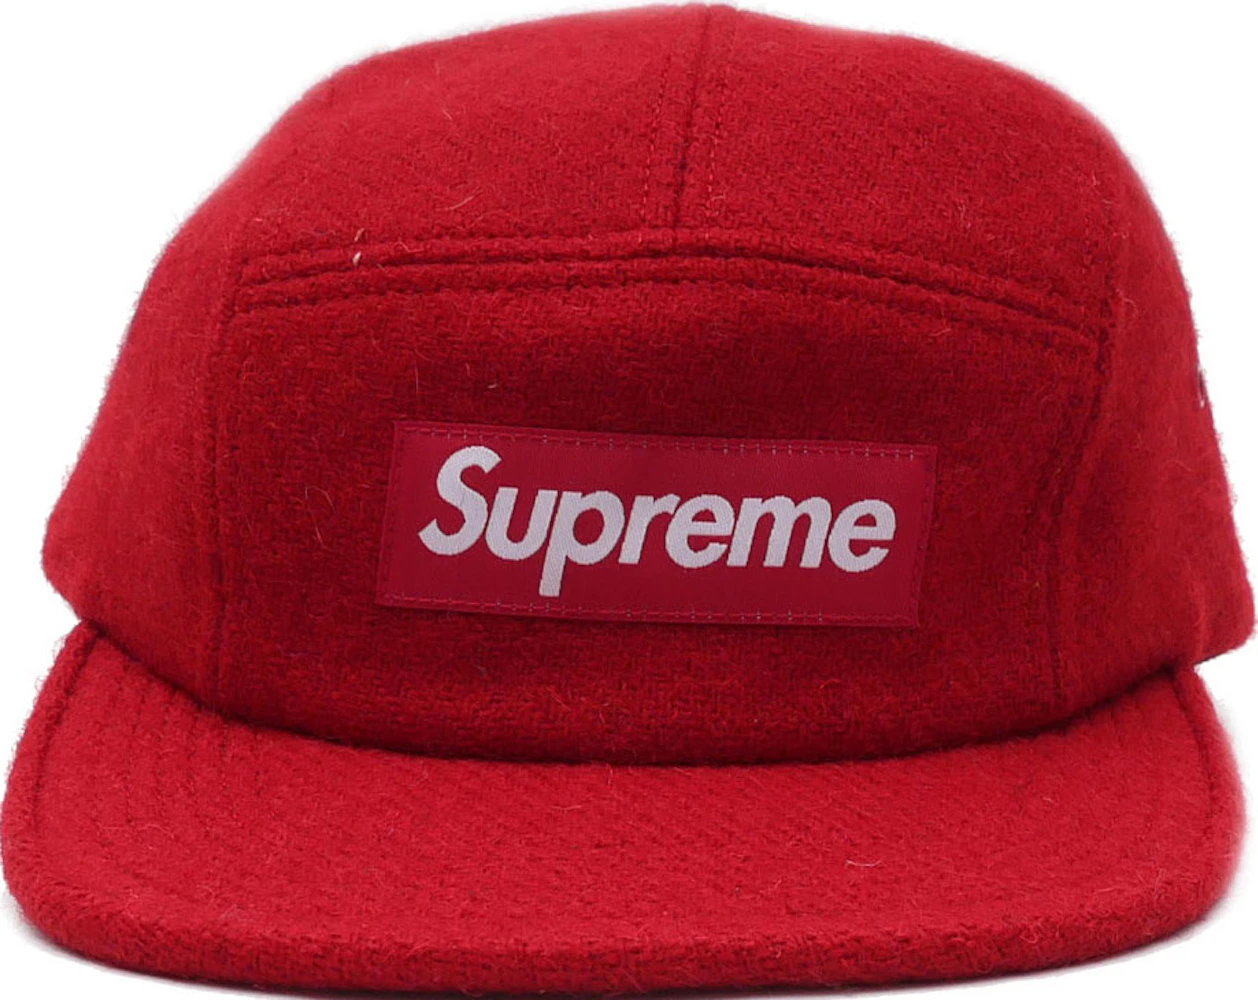 Supreme Featherweight Wool Camp Cap Red - FW16 - US